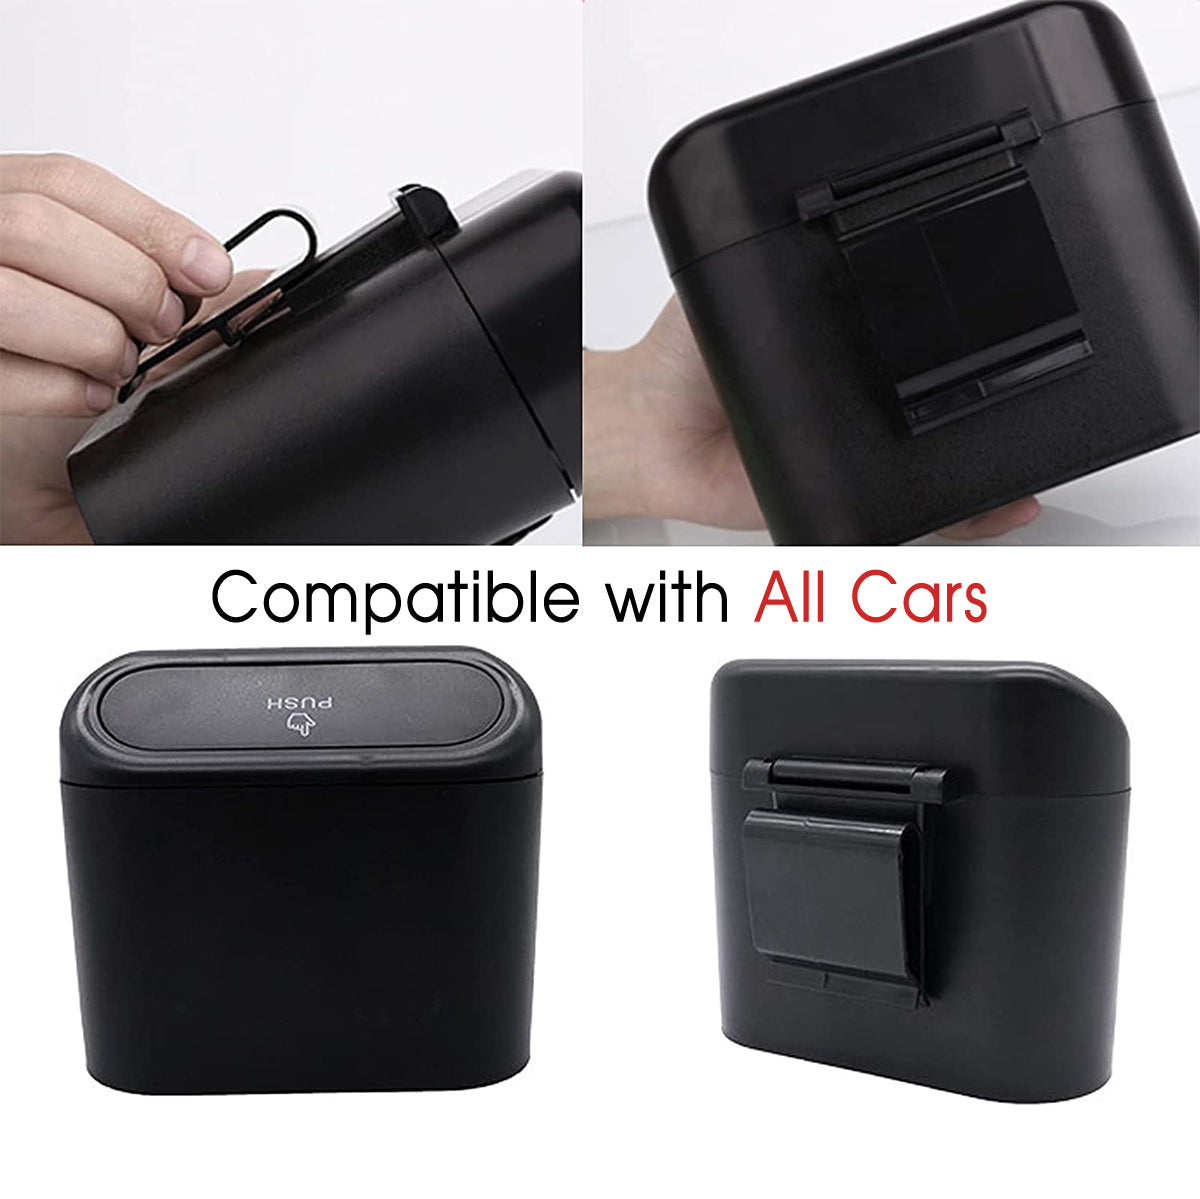 Car Trash Can, Custom For Your Cars, Mini Car Accessories with Lid and Trash Bag, Cute Car Organizer Bin, Small Garbage Can for Storage and Organization, Car Accessories WQ11996